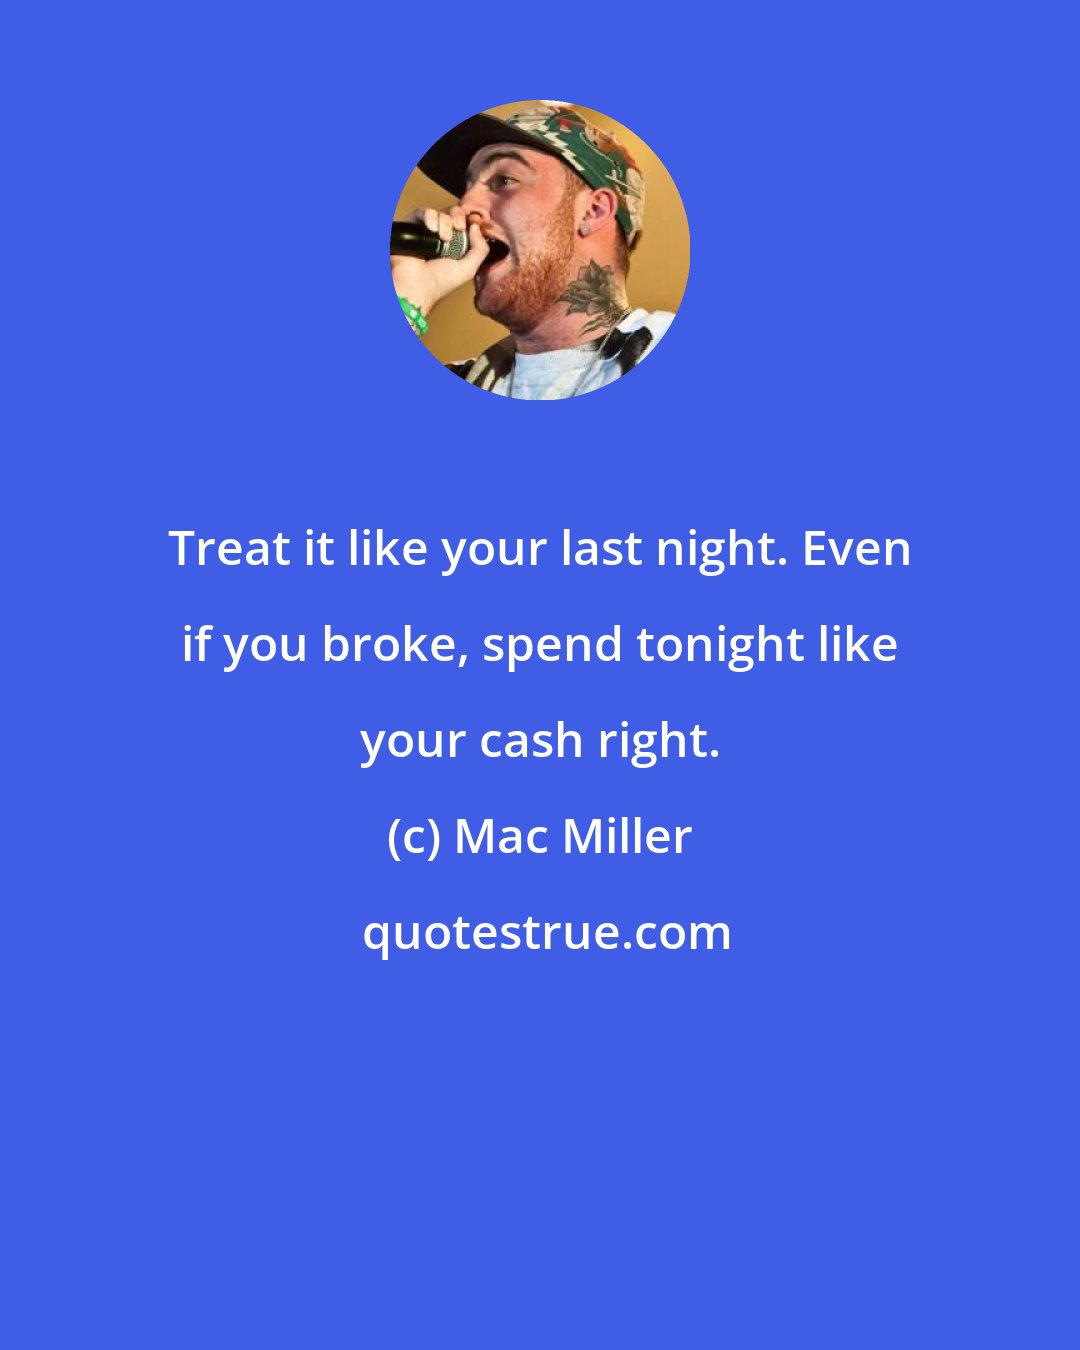 Mac Miller: Treat it like your last night. Even if you broke, spend tonight like your cash right.